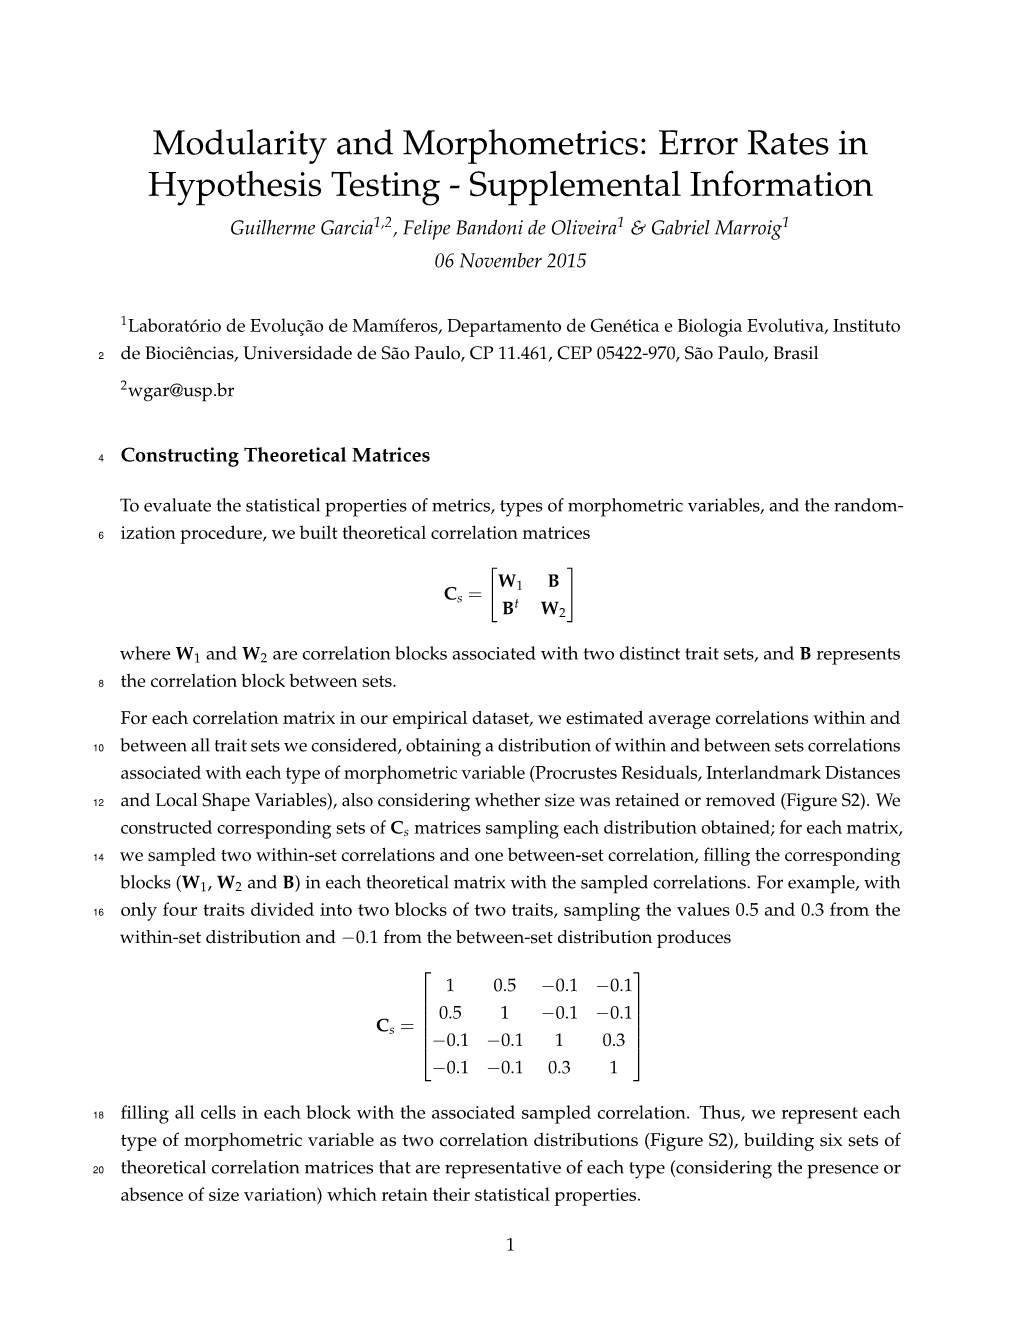 Modularity and Morphometrics: Error Rates in Hypothesis Testing